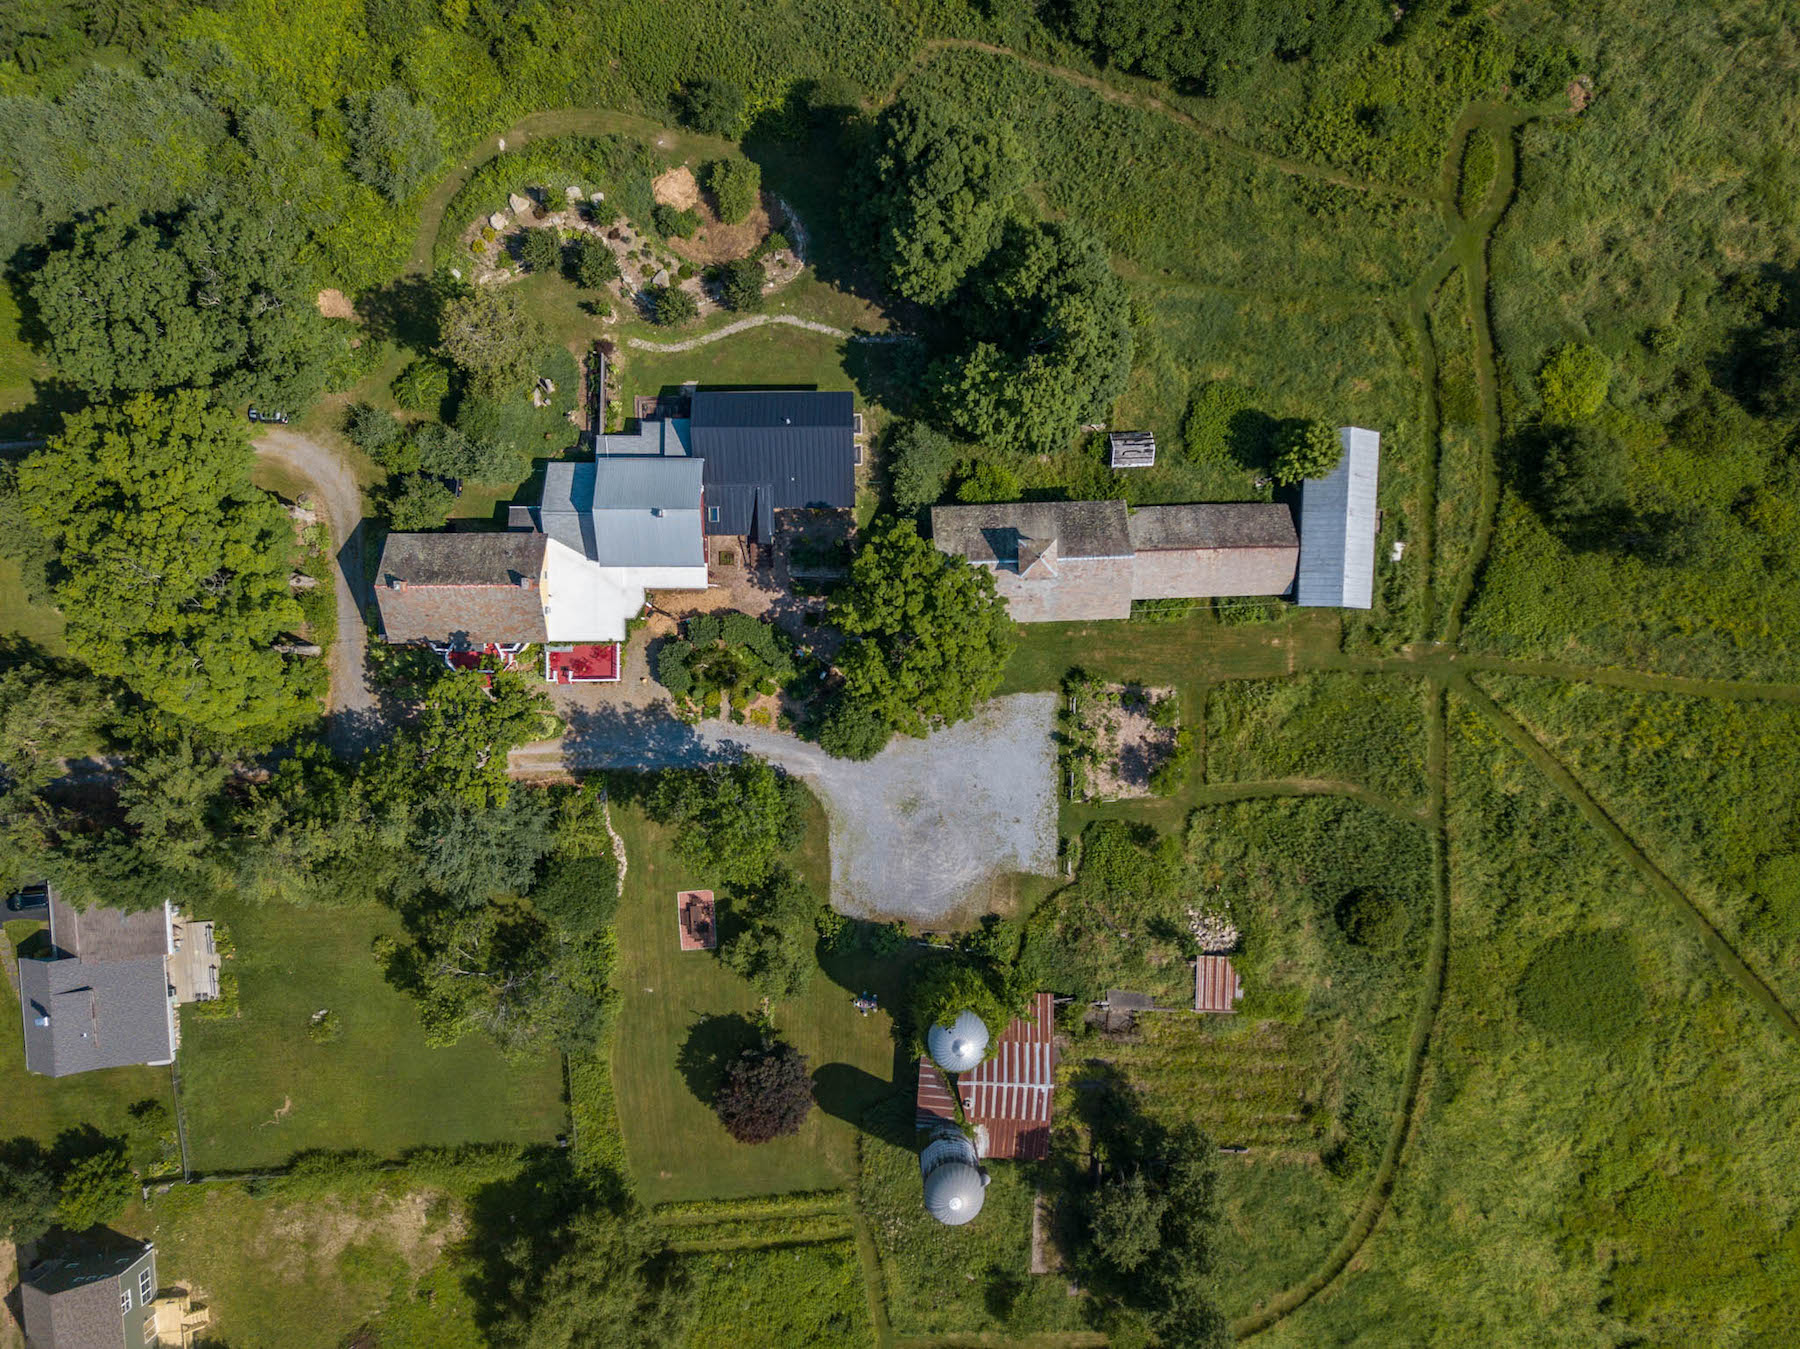 An aerial view of the property showing the surrounding area and trails where guests can roam | Near Lake George | Adirondacks | Saratoga Farmstead B&B